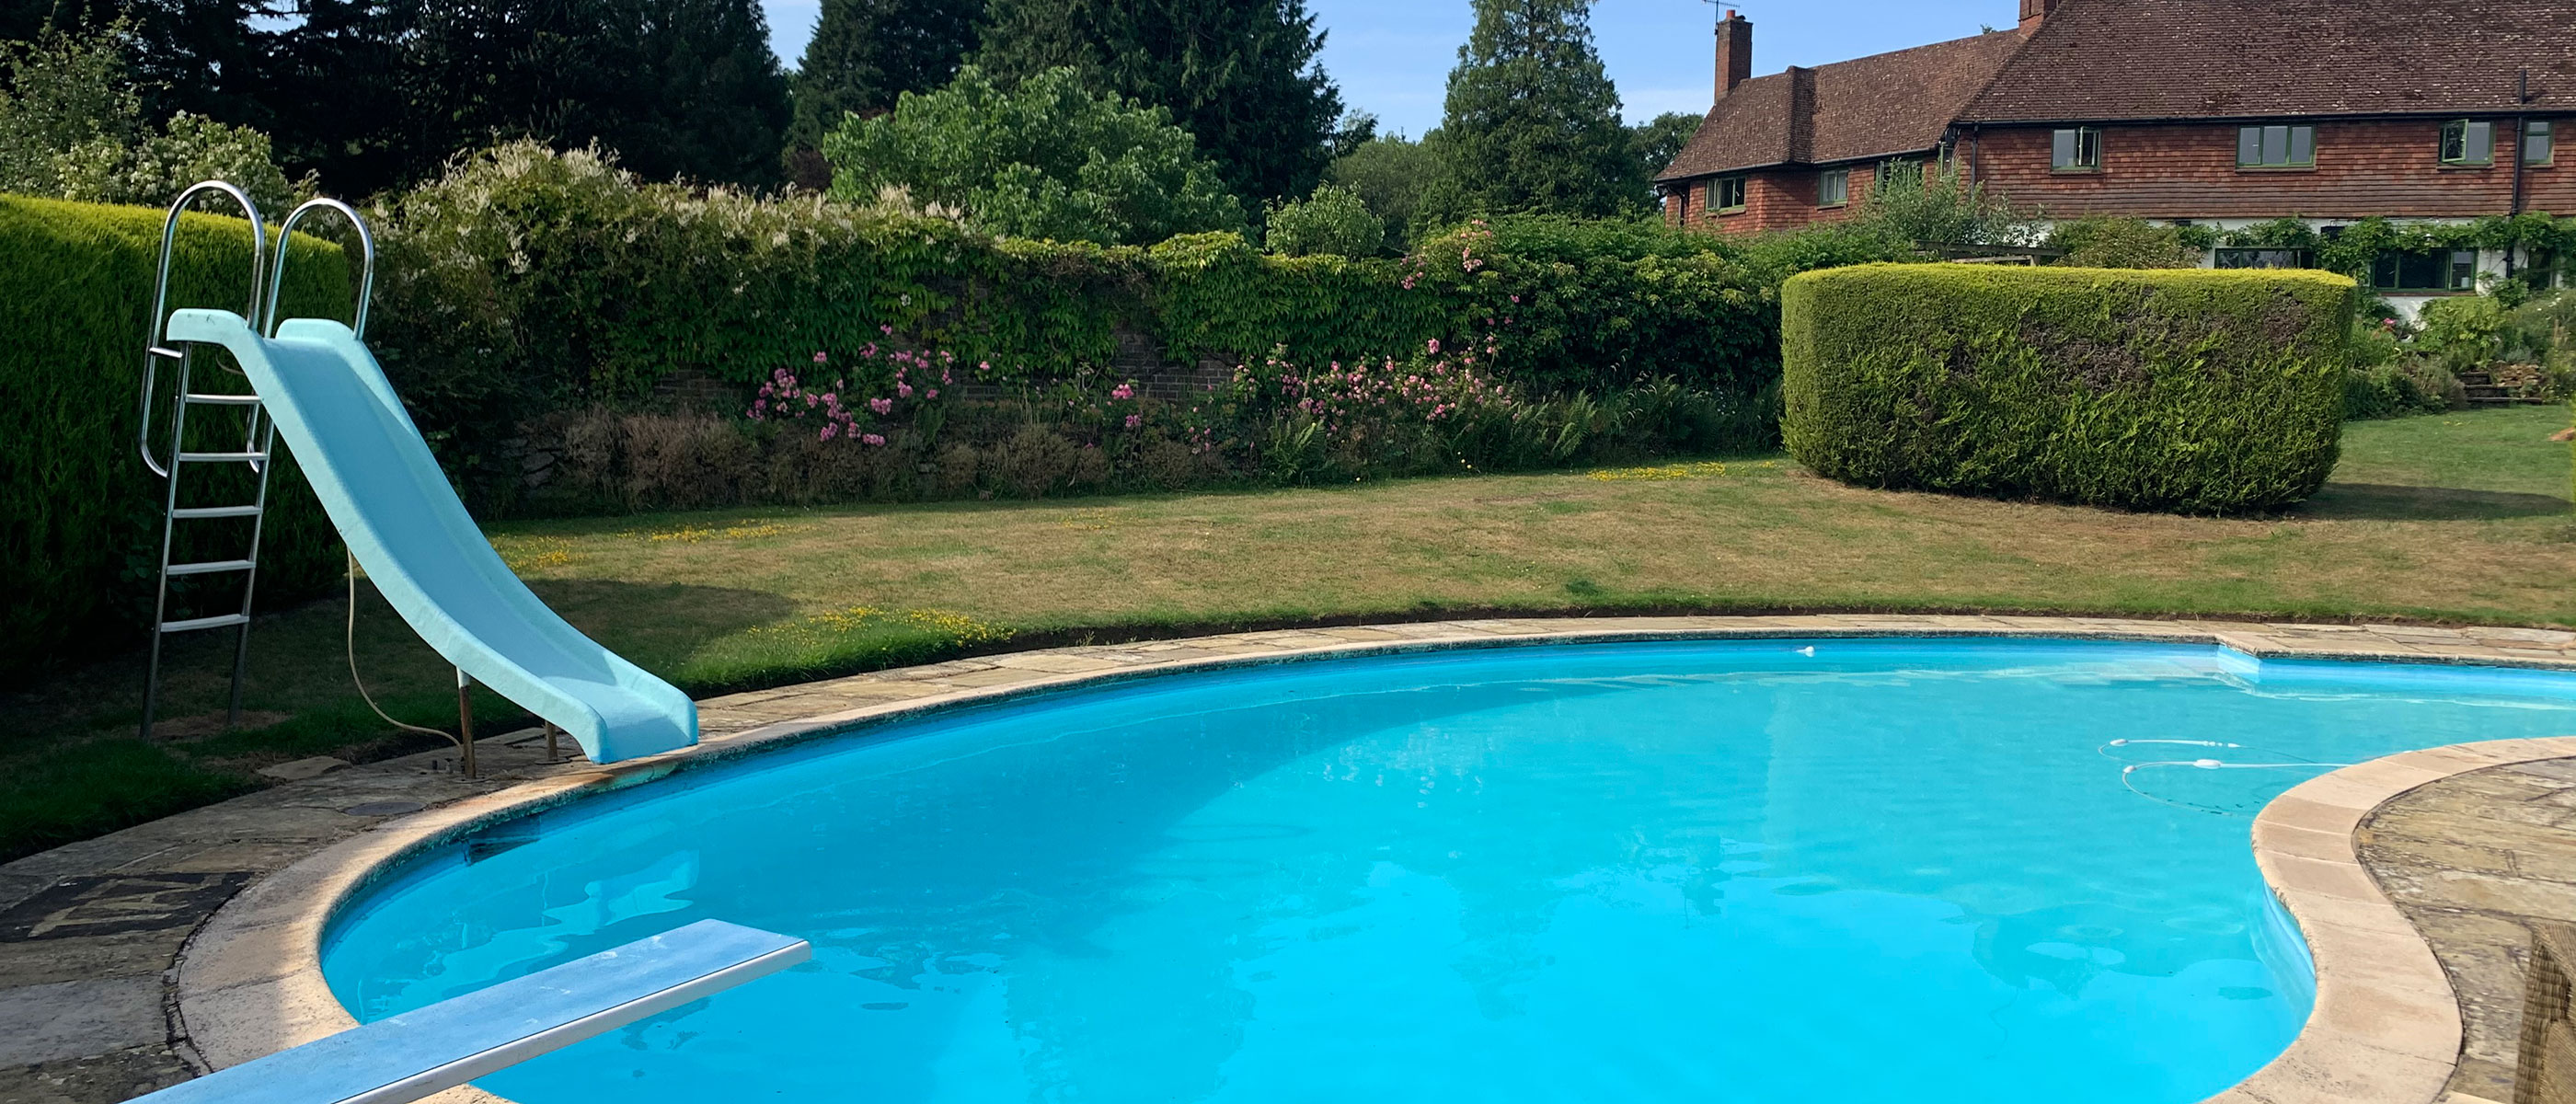 Tor Hatch holiday home swimming pool for groups in Shere Surrey